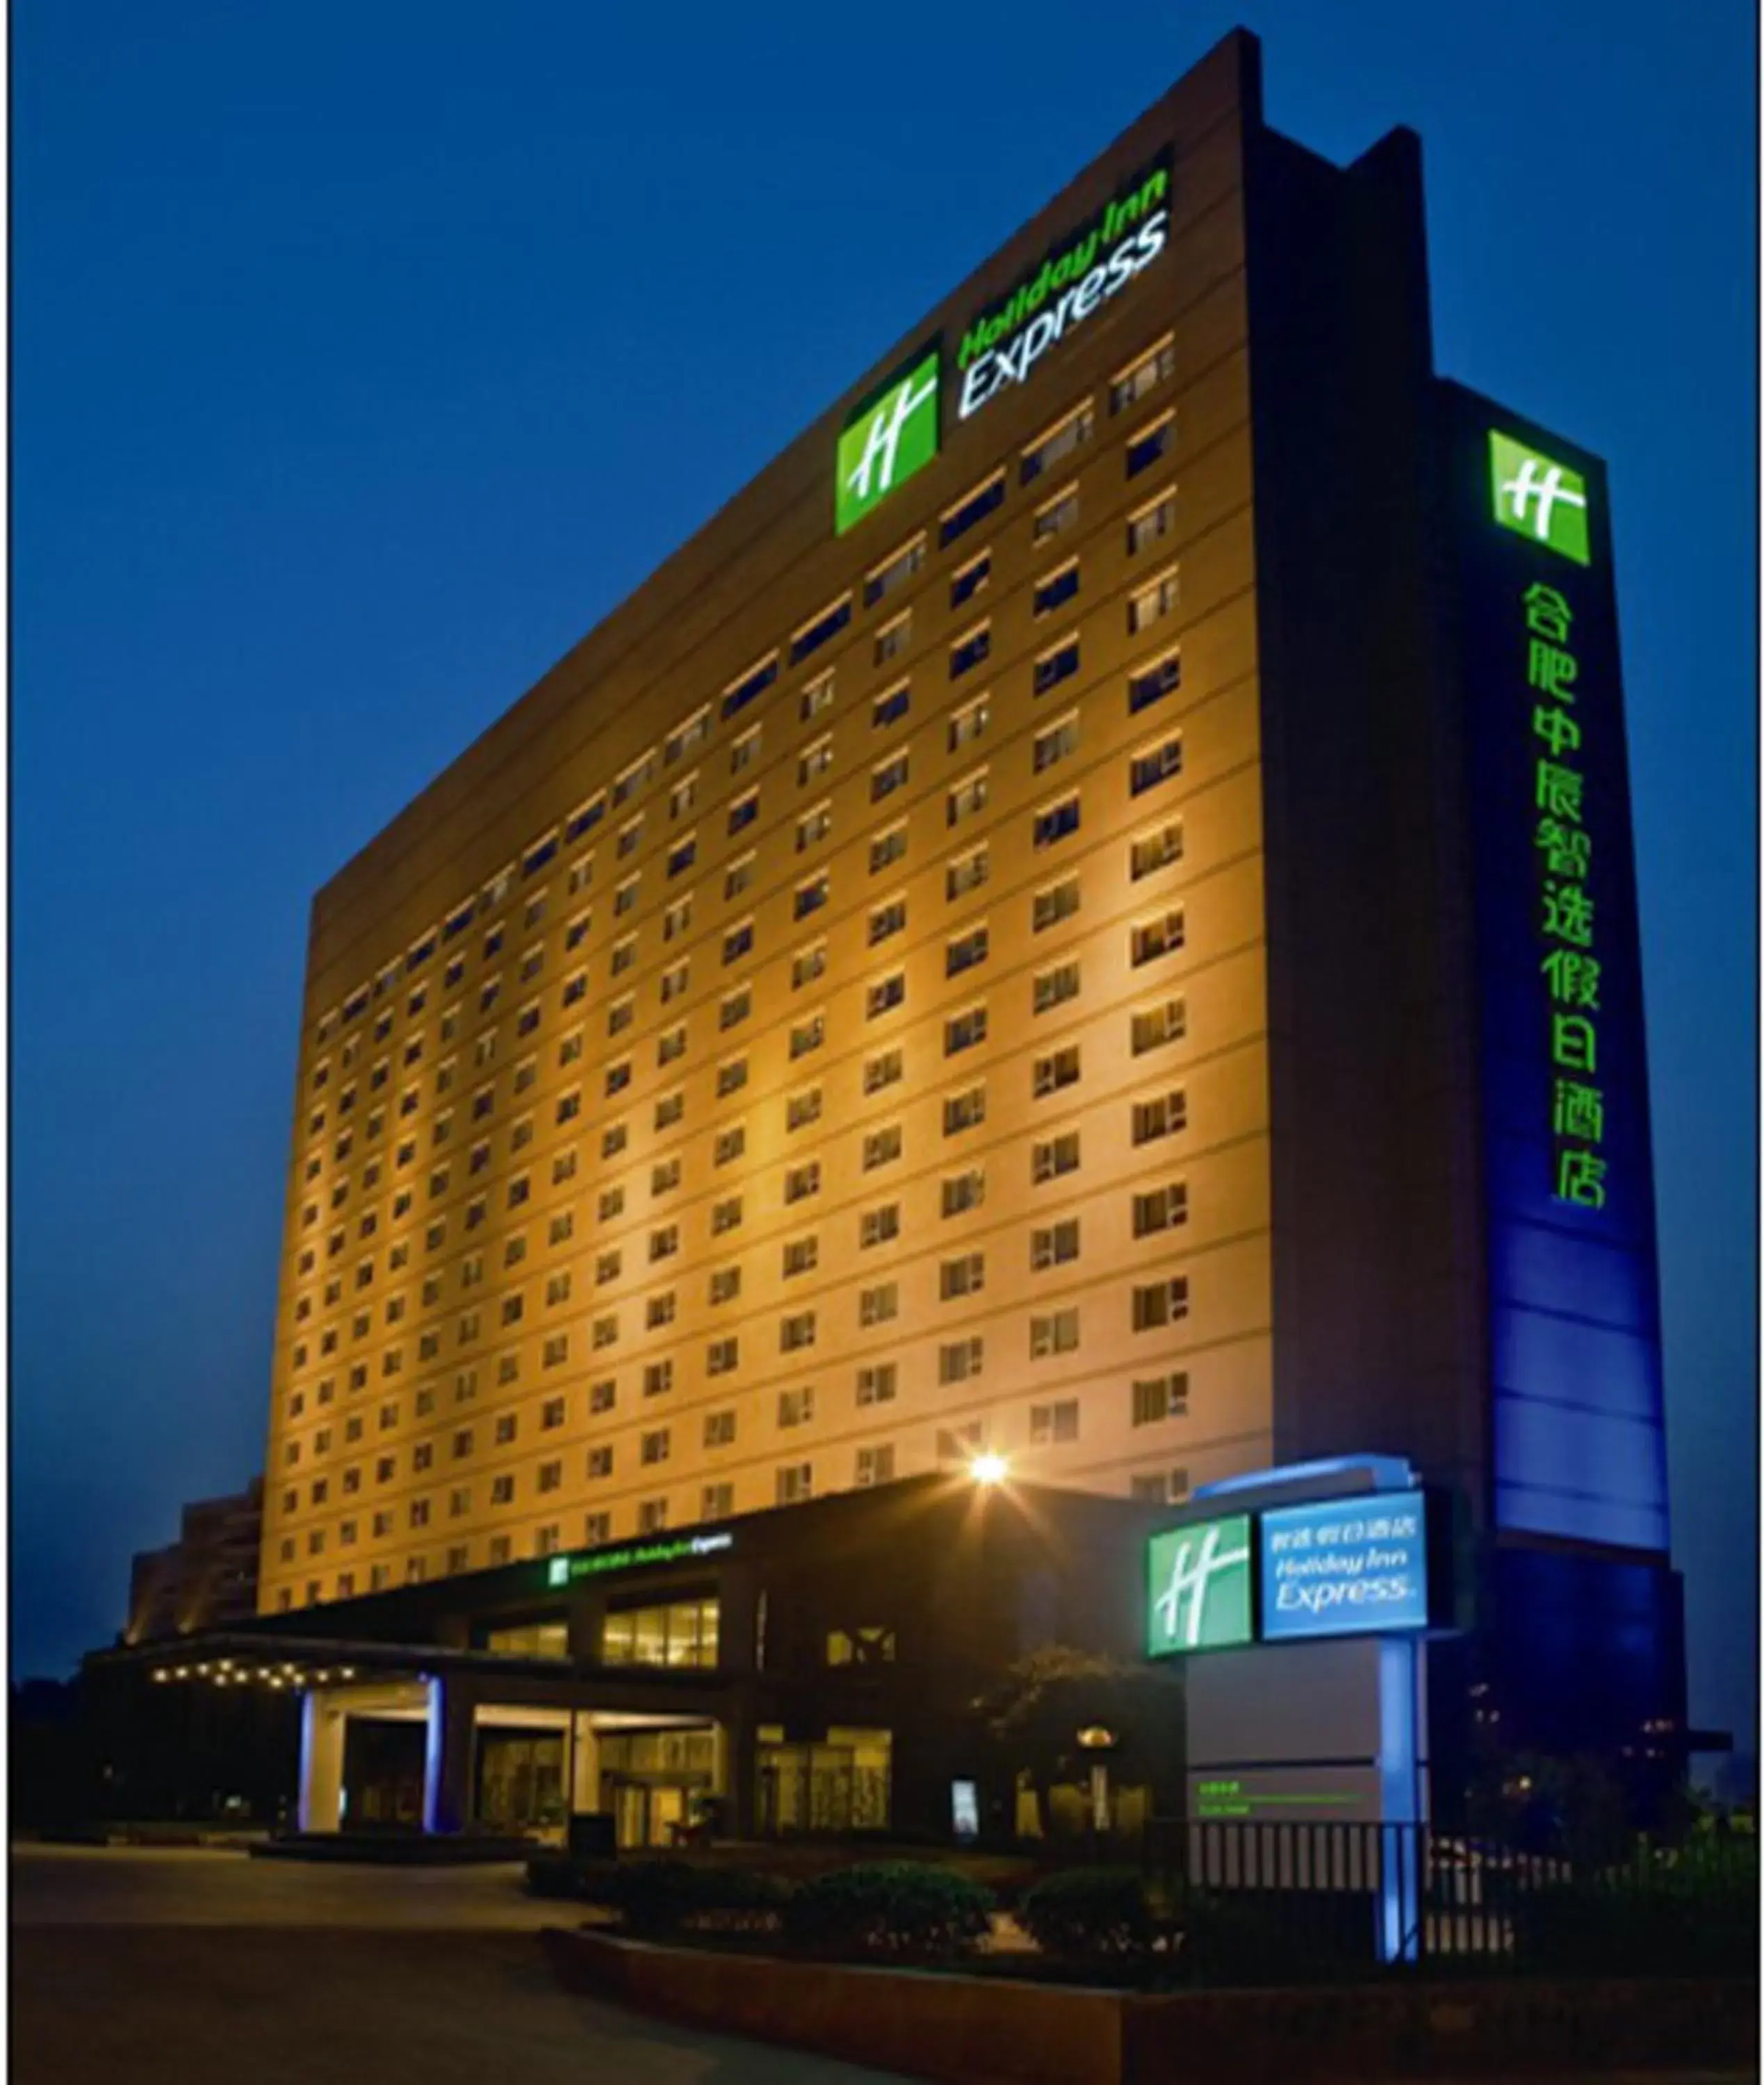 Property Building in Holiday Inn Express Hefei South, an IHG Hotel